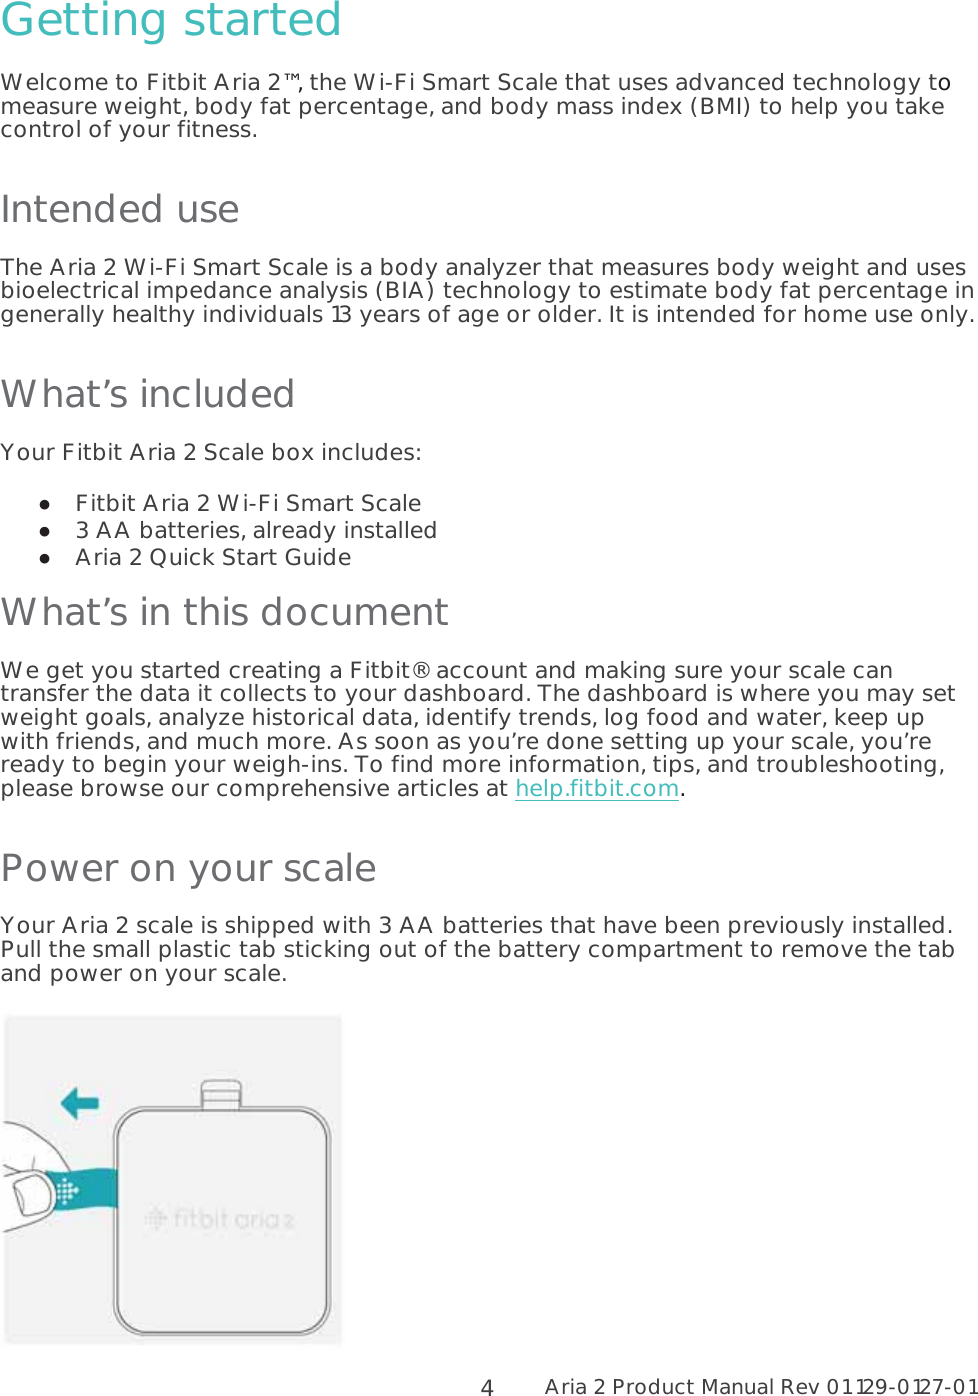 Aria 2 Product Manual Rev 01 129-0127-01  4Getting started Welcome to Fitbit Aria 2™, the Wi-Fi Smart Scale that uses advanced technology to measure weight, body fat percentage, and body mass index (BMI) to help you take control of your fitness. Intended use The Aria 2 Wi-Fi Smart Scale is a body analyzer that measures body weight and uses bioelectrical impedance analysis (BIA) technology to estimate body fat percentage in generally healthy individuals 13 years of age or older. It is intended for home use only. What’s included Your Fitbit Aria 2 Scale box includes:  Fitbit Aria 2 Wi-Fi Smart Scale  3 AA batteries, already installed  Aria 2 Quick Start Guide What’s in this document  We get you started creating a Fitbit® account and making sure your scale can transfer the data it collects to your dashboard. The dashboard is where you may set weight goals, analyze historical data, identify trends, log food and water, keep up with friends, and much more. As soon as you’re done setting up your scale, you’re ready to begin your weigh-ins. To find more information, tips, and troubleshooting, please browse our comprehensive articles at help.fitbit.com. Power on your scale Your Aria 2 scale is shipped with 3 AA batteries that have been previously installed. Pull the small plastic tab sticking out of the battery compartment to remove the tab and power on your scale.   